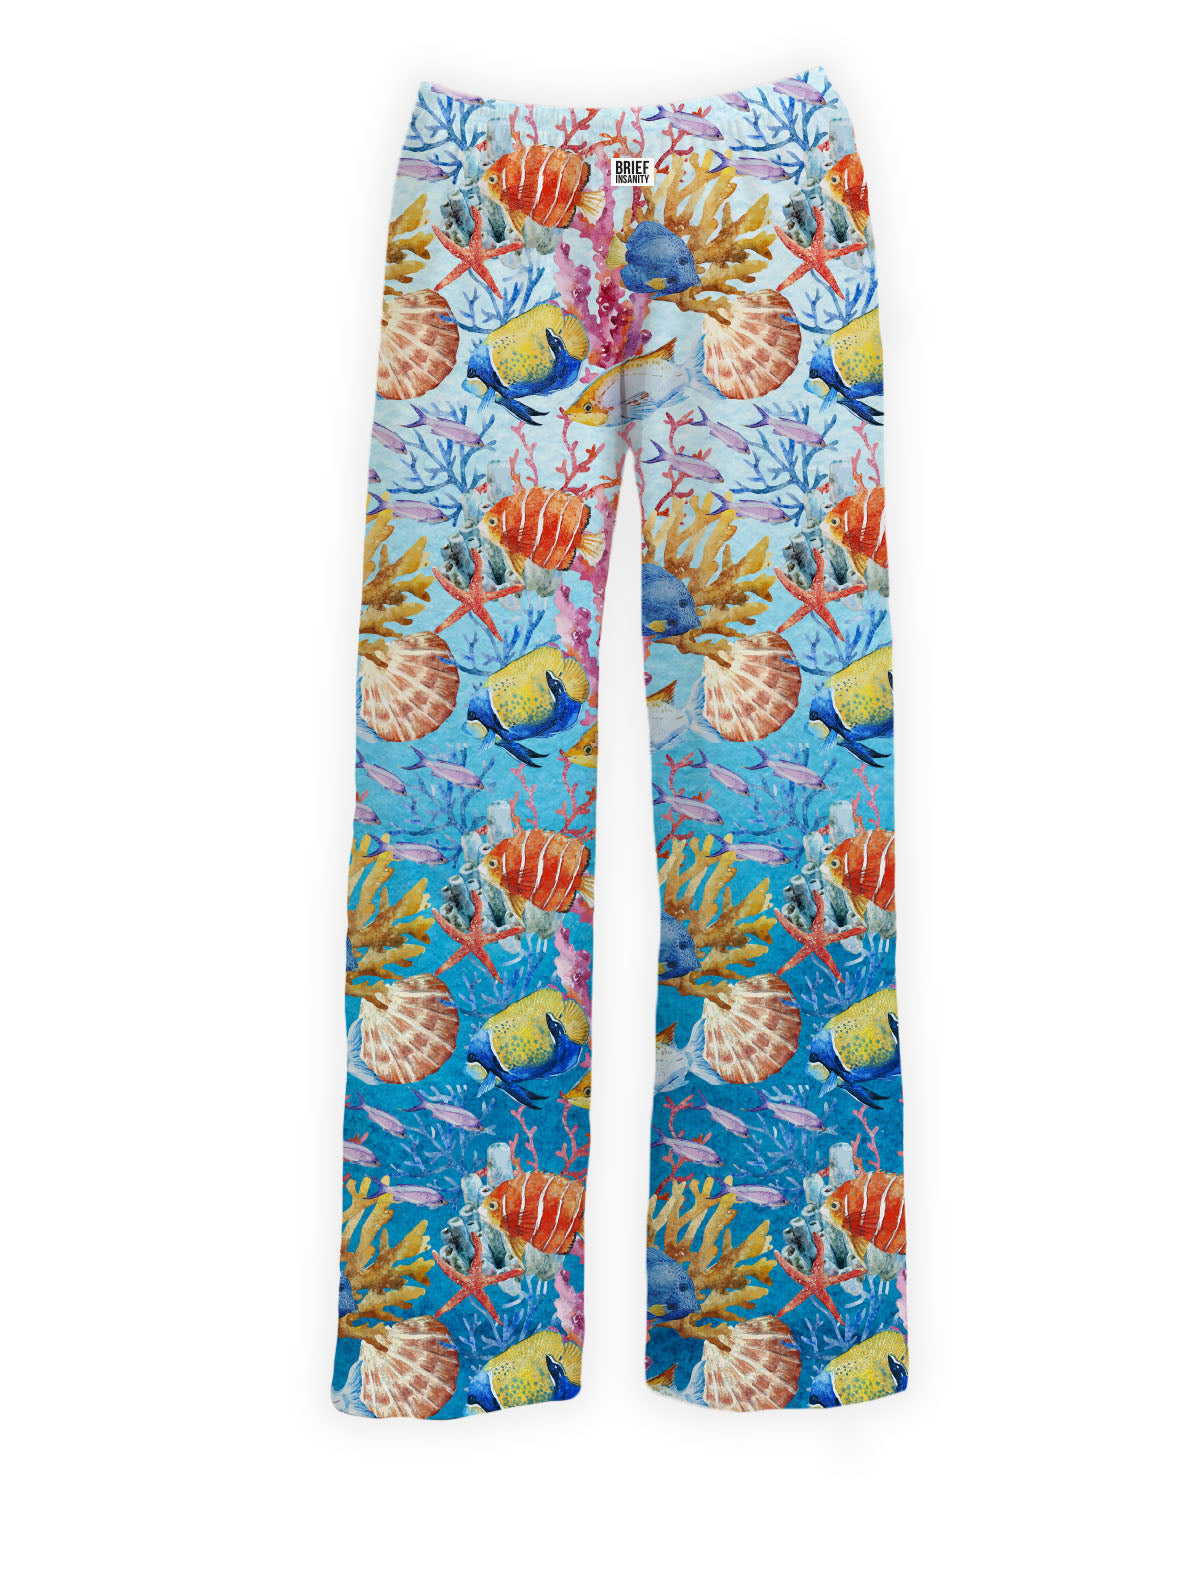 Brief Insanity Tropical Fish Pattern Lounge Pants Large